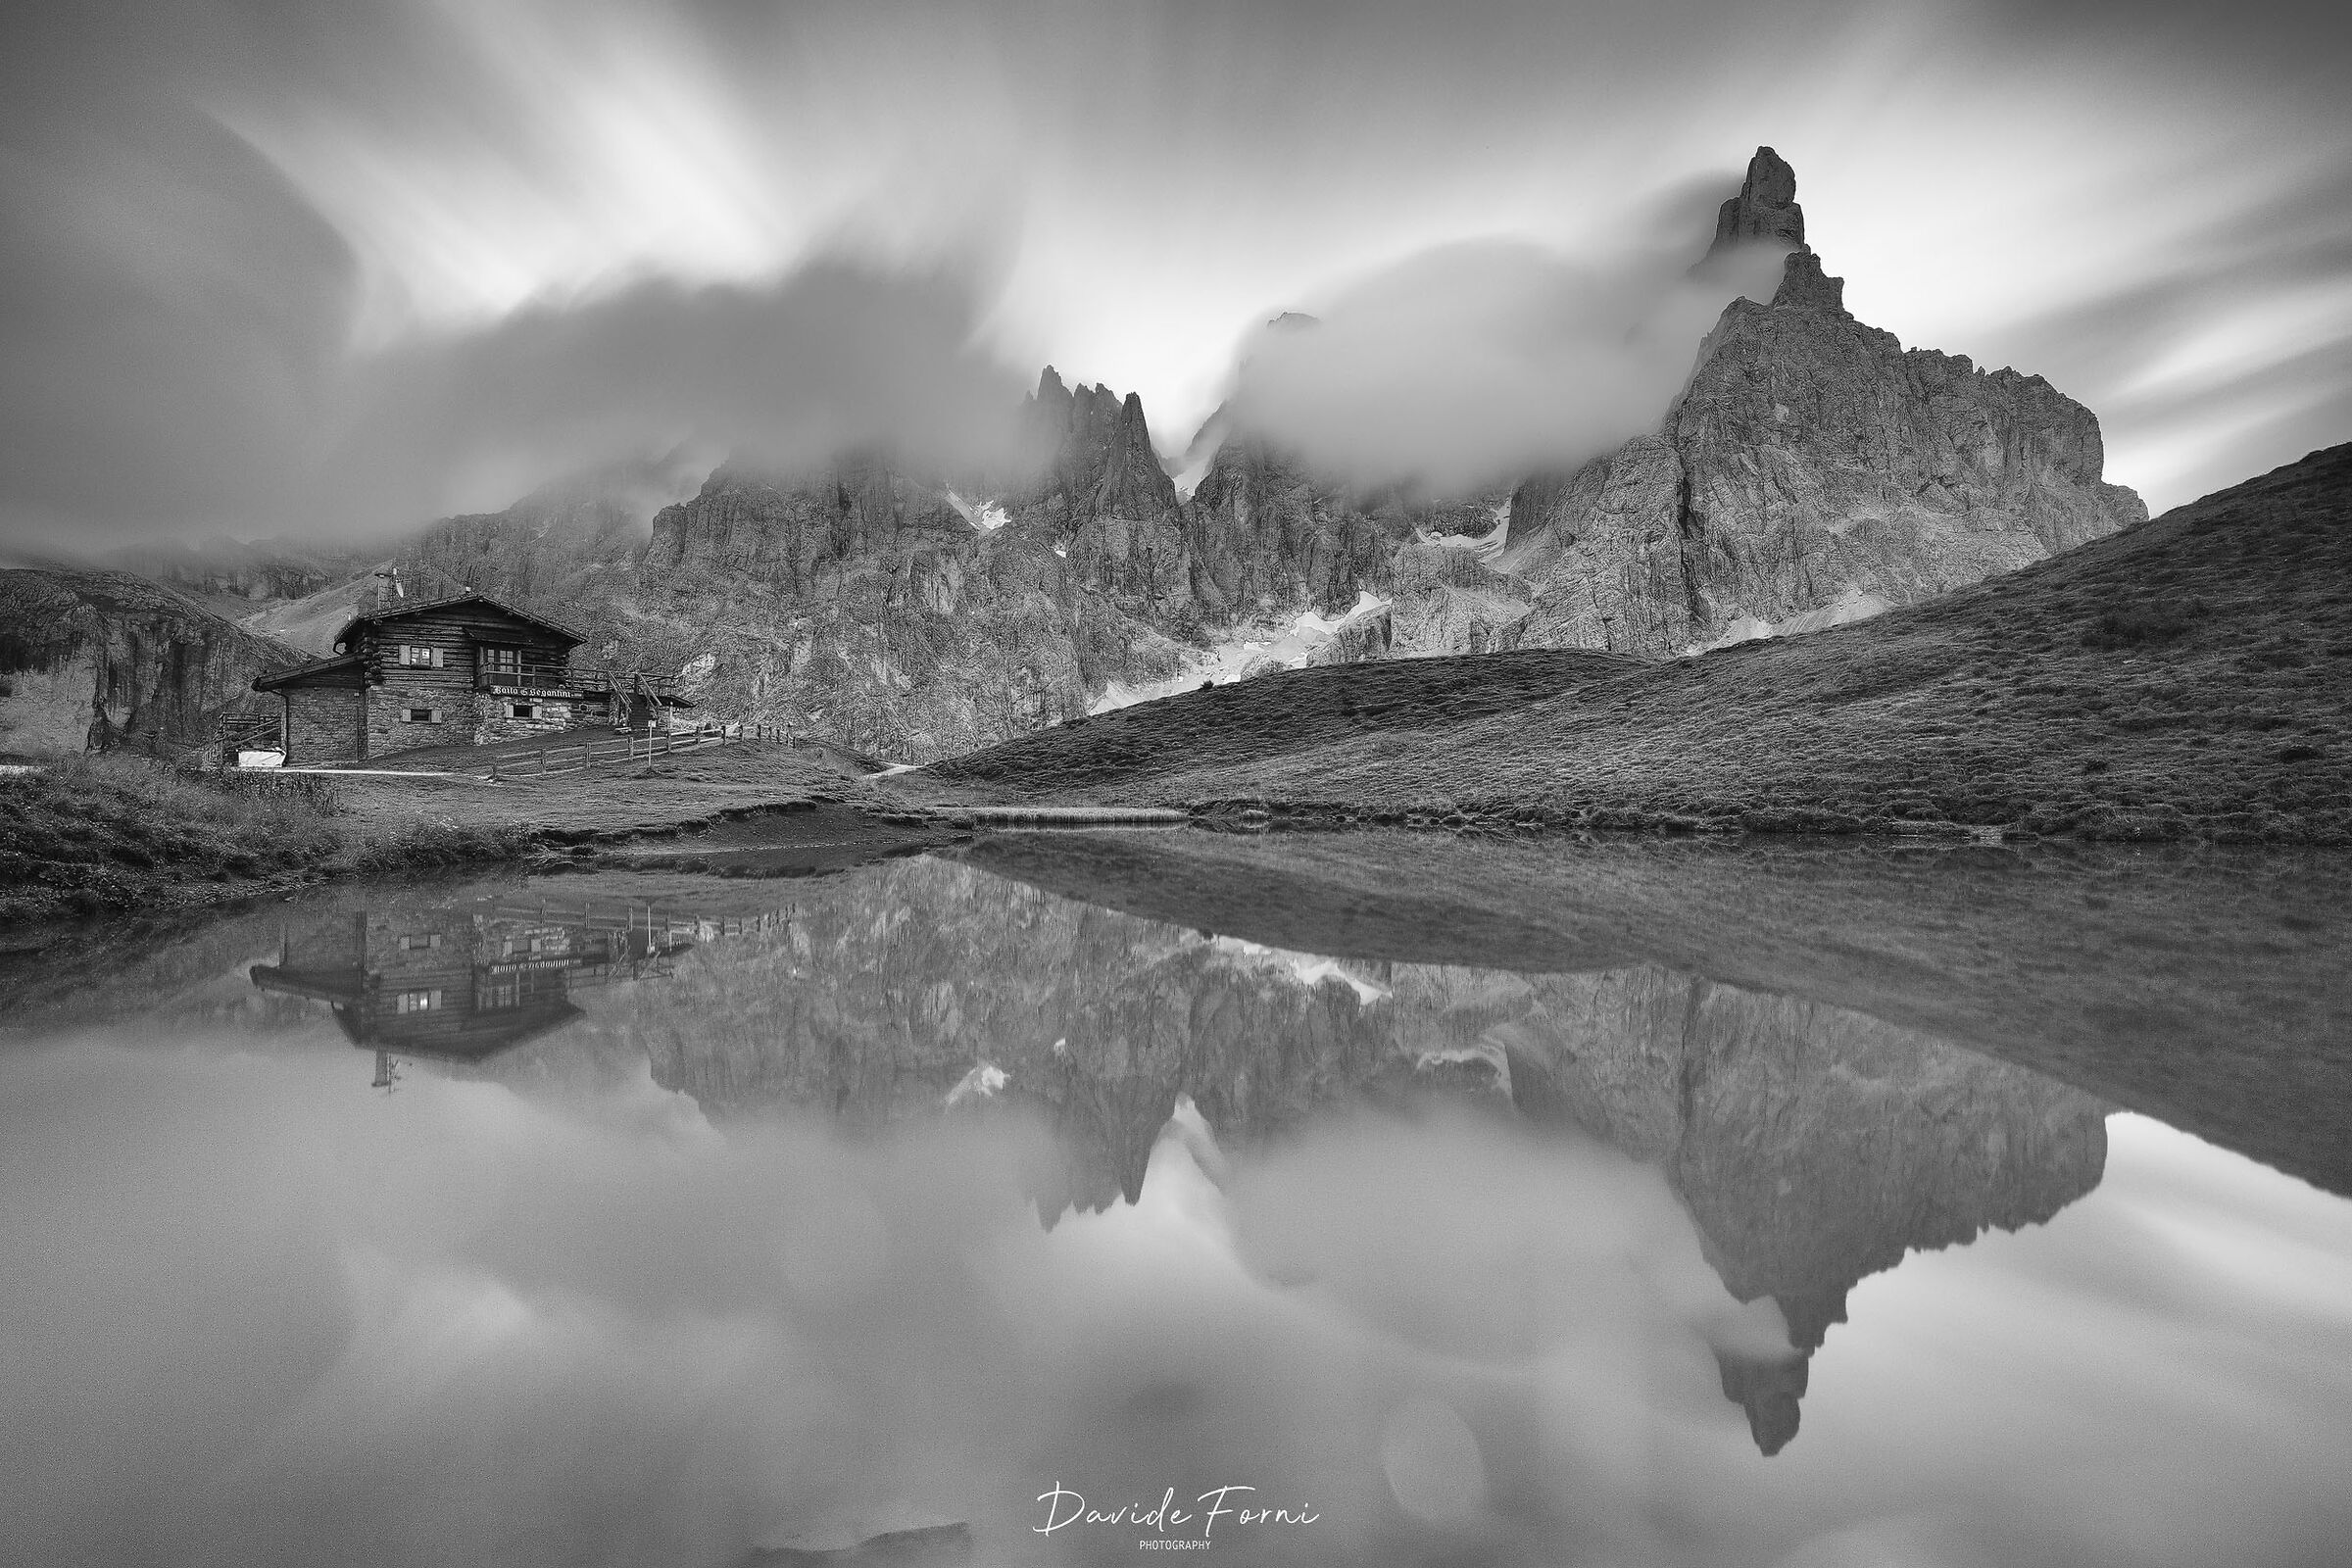 Sunset clouds over the Pale di San Martino...